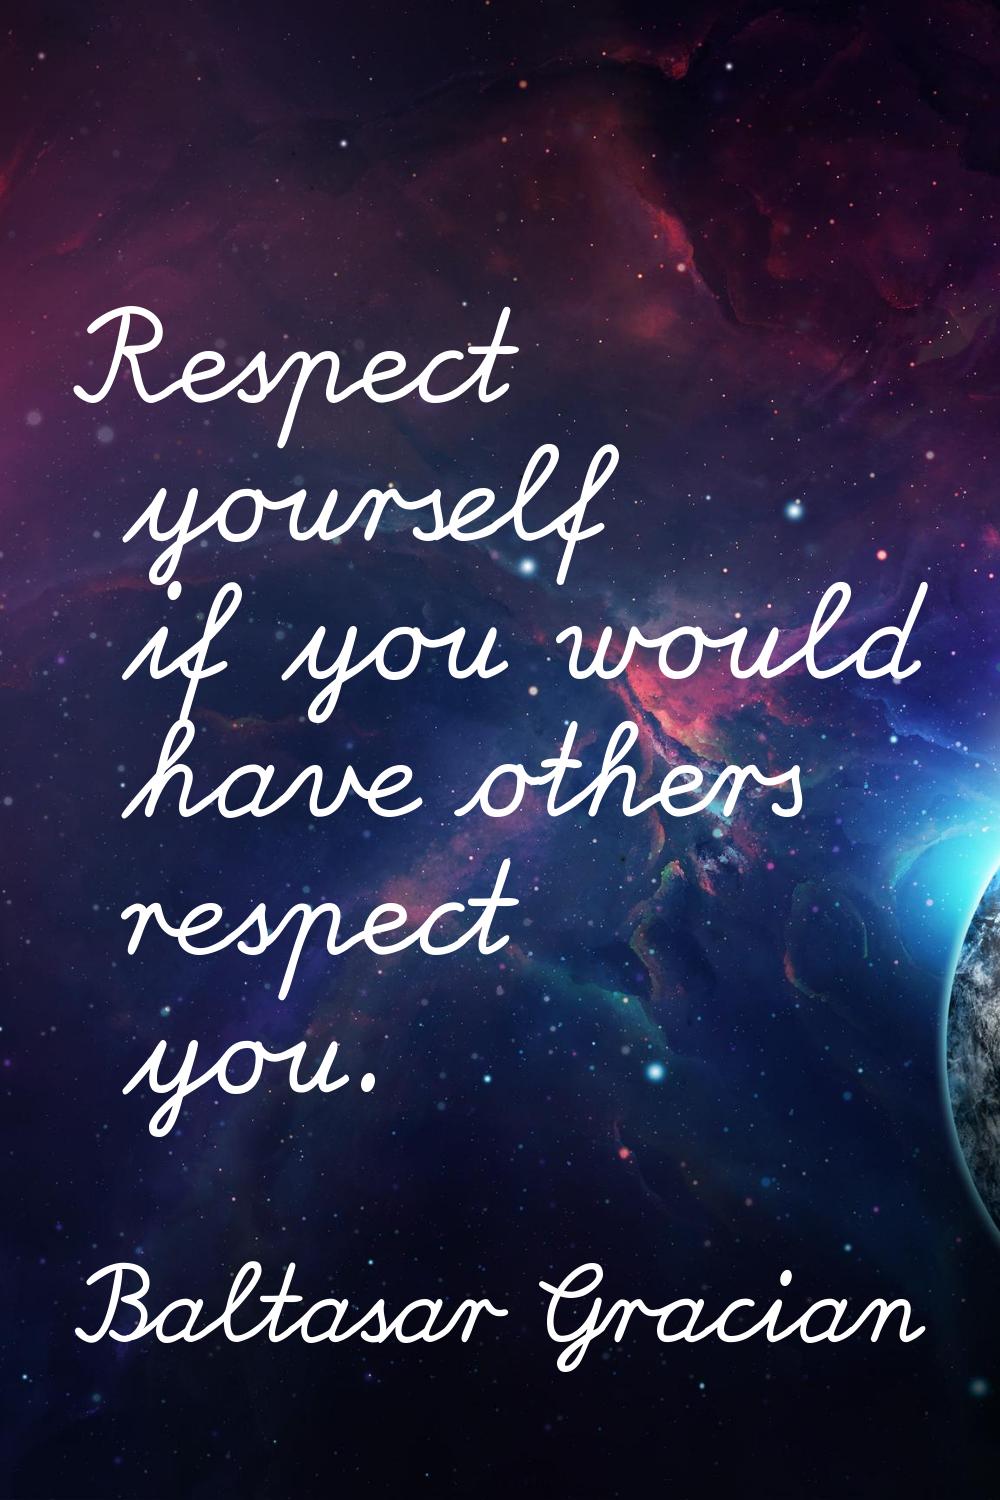 Respect yourself if you would have others respect you.